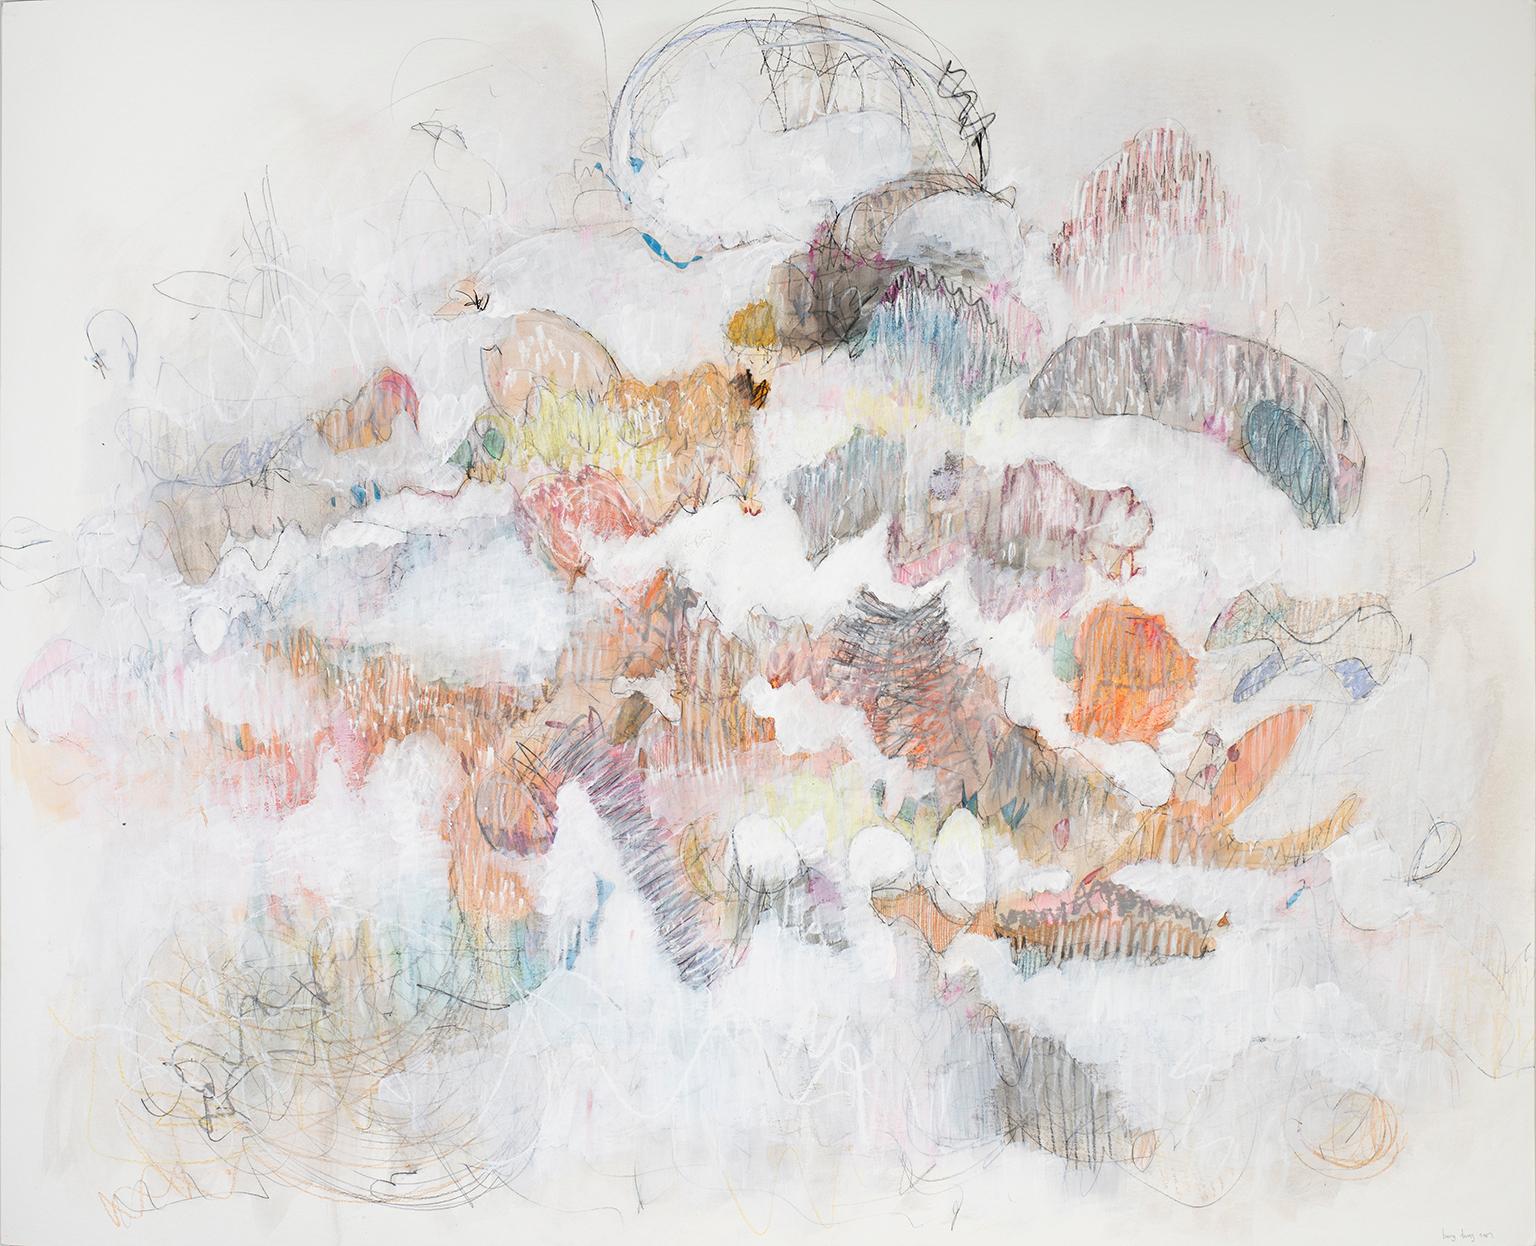 White on Scribbles 1 by Bang Dang, 2017
32 x 40 inch
Professionally float framed with a 1 inch border. 
Watercolor, ink, color pencil, pastel, graphite and gesso on paper.

Bang Dang's work is a form of meditation apart from his work as an